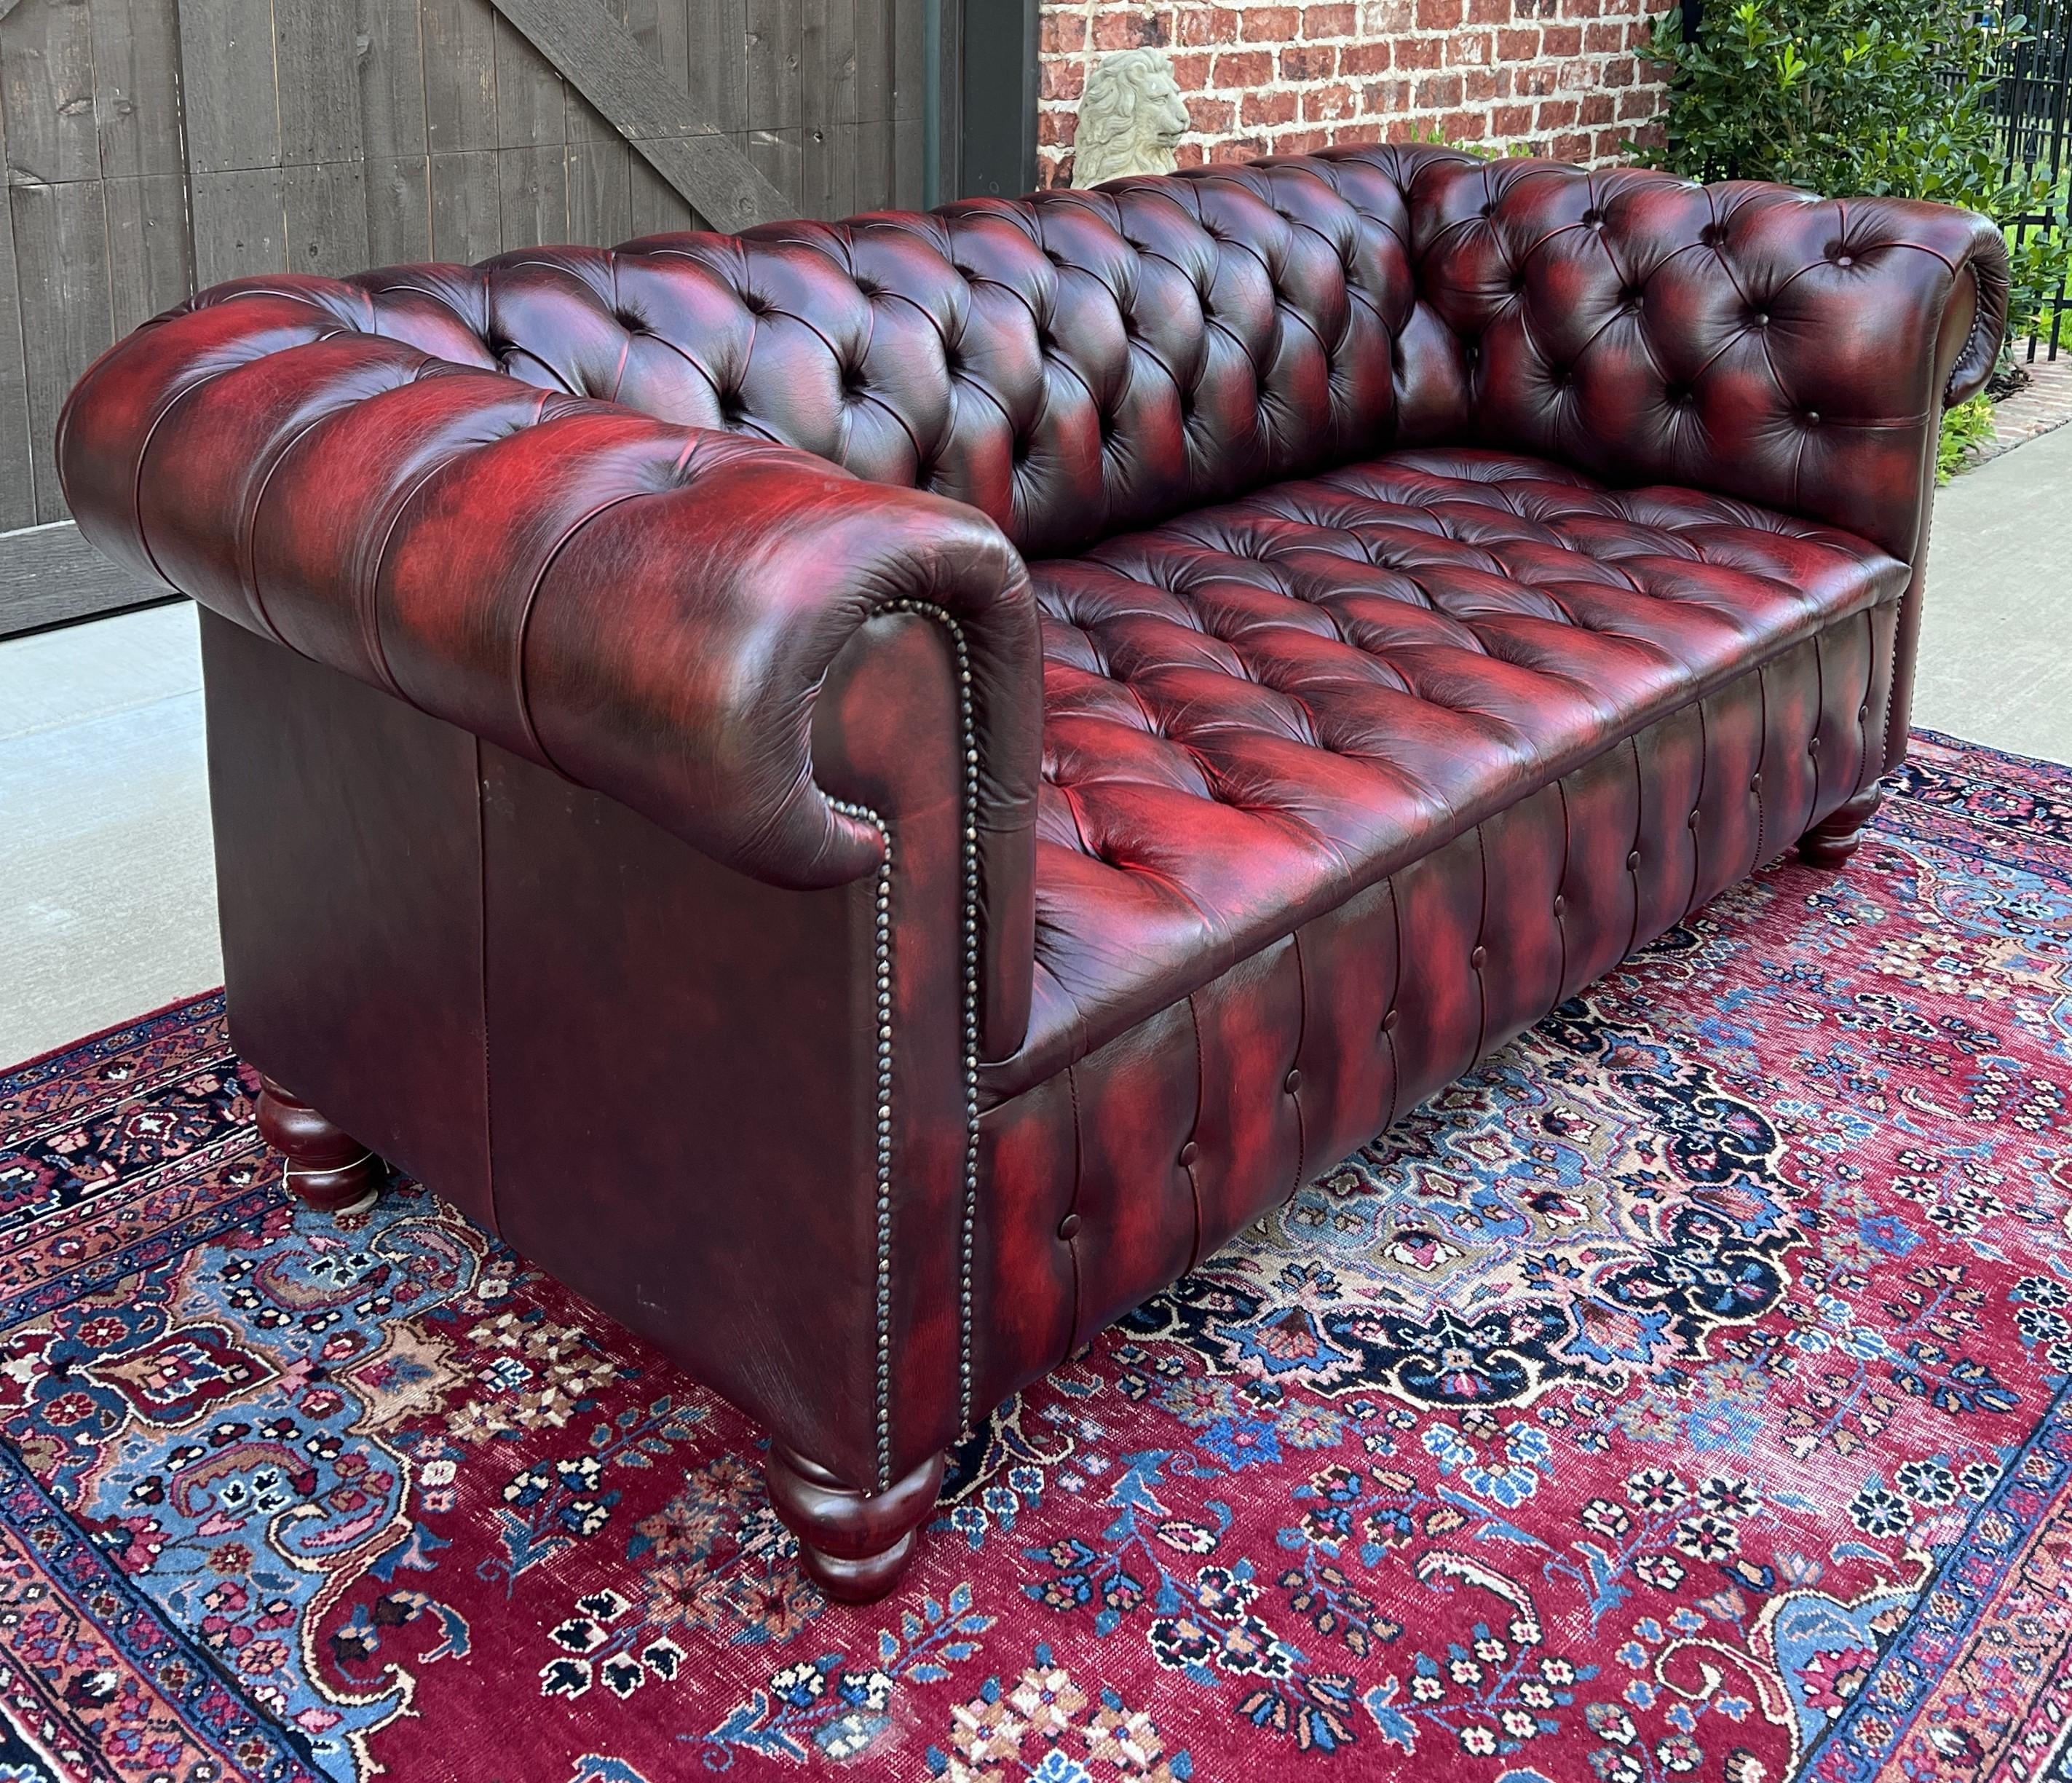 Vintage English Chesterfield Leather Sofa Tufted Seat Oxblood Red Mid-Century #2 1